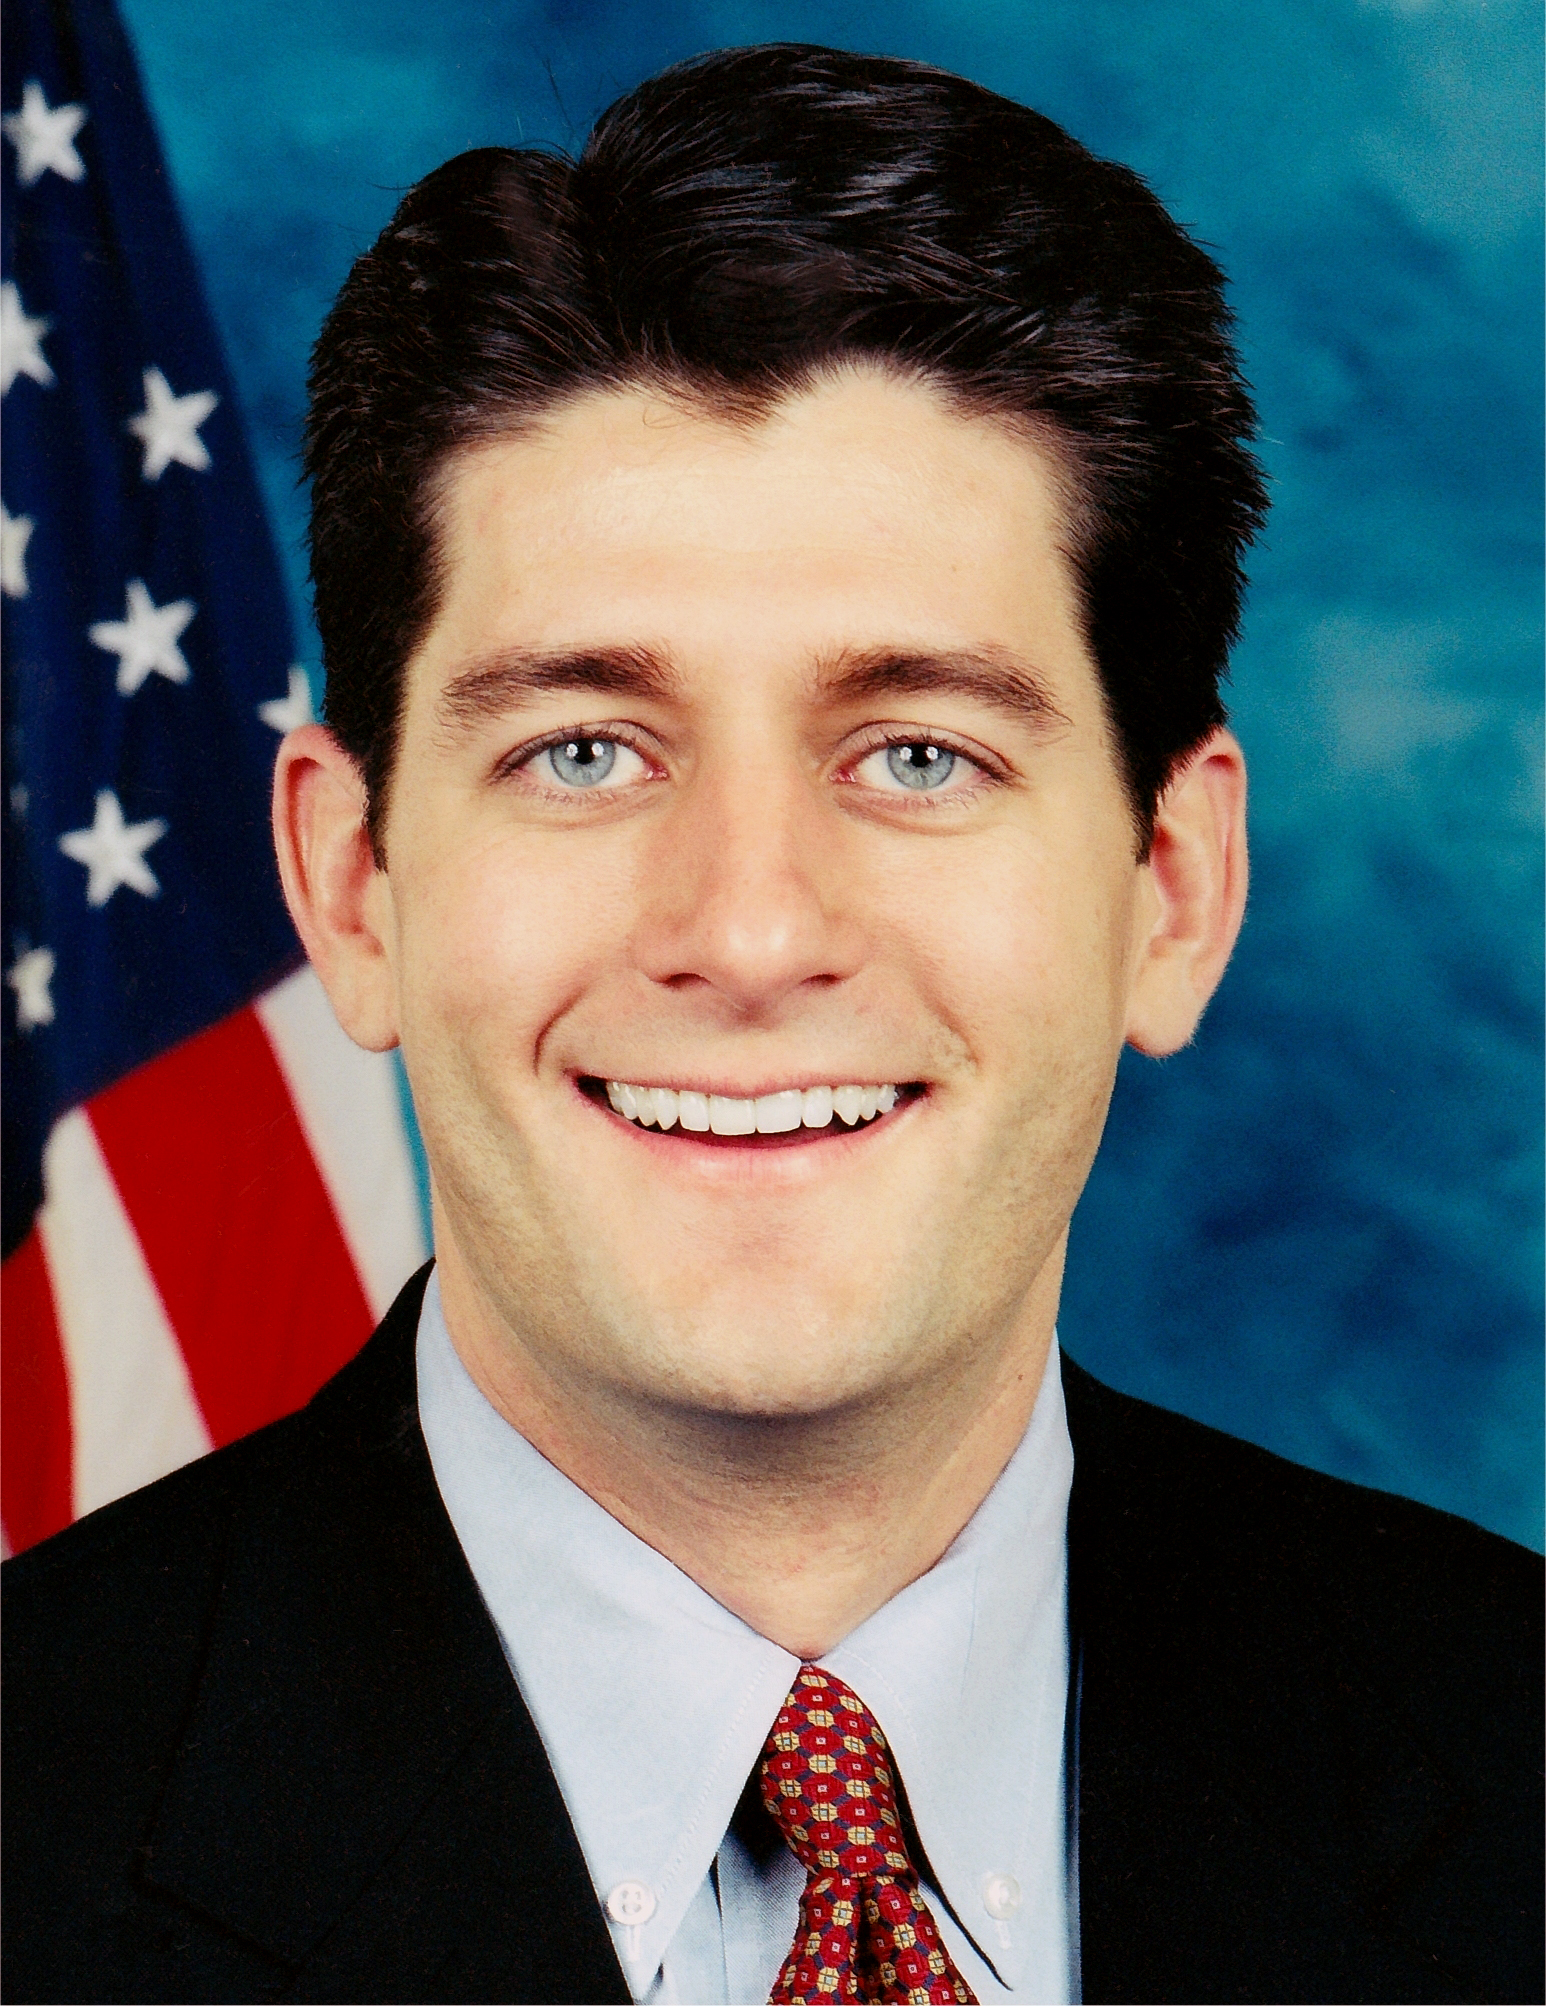 Paul Ryan, member of the U.S. House of Representatives from Wisconsin's 1st district.